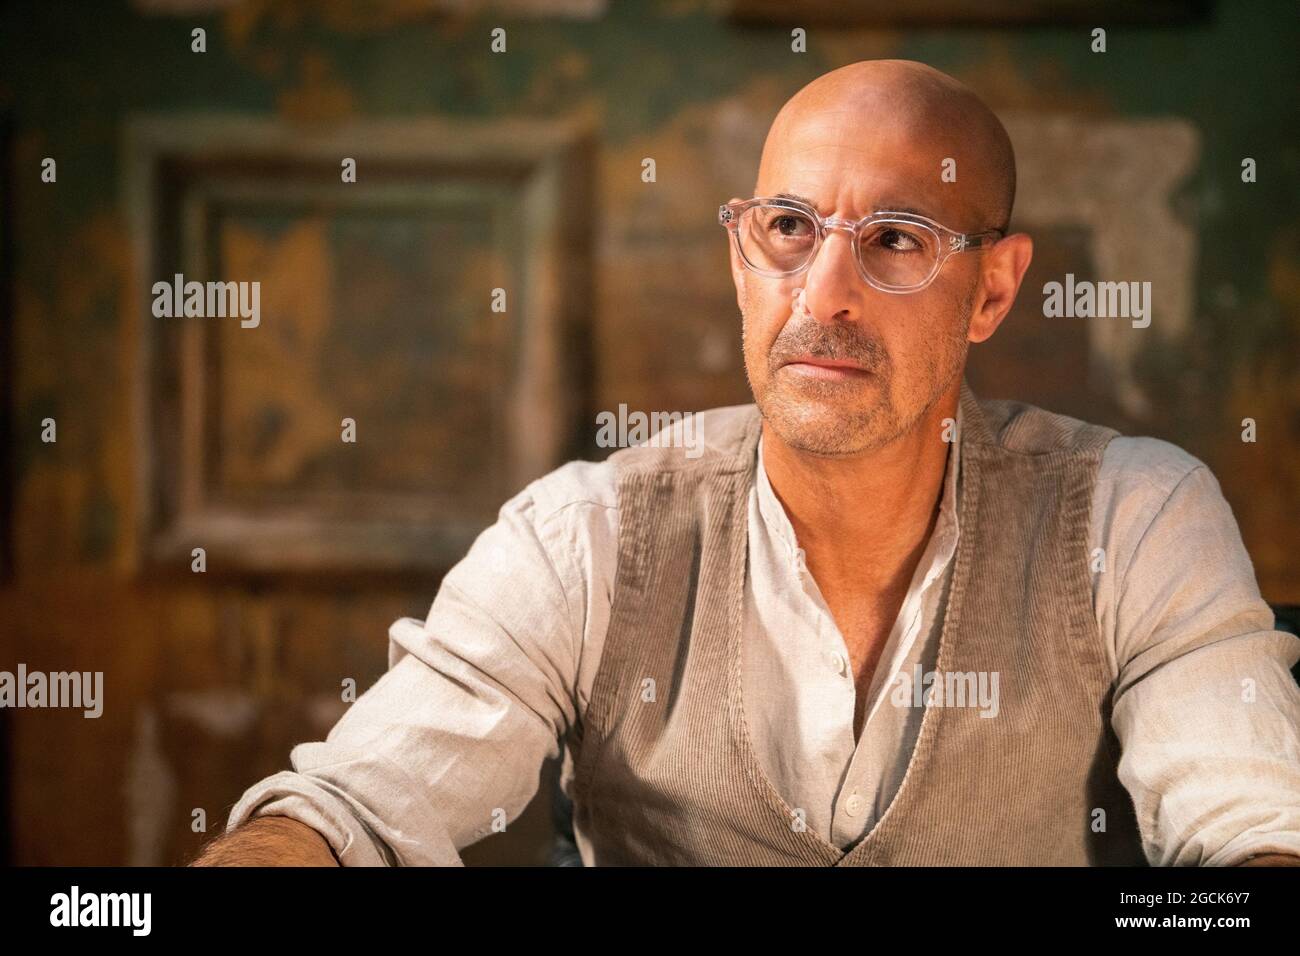 https://c8.alamy.com/comp/2GCK6Y7/usa-stanley-tucci-in-the-camazon-prime-video-new-movie-jolt-2021-plot-a-bouncer-with-a-slightly-murderous-anger-management-problem-that-she-controls-with-the-help-of-an-electrode-lined-vest-she-uses-to-shock-herself-back-to-normalcy-whenever-she-gets-homicidal-ref-lmk106-j7261-060821-supplied-by-lmkmedia-editorial-only-landmark-media-is-not-the-copyright-owner-of-these-film-or-tv-stills-but-provides-a-service-only-for-recognised-media-outlets-pictures@lmkmediacom-2GCK6Y7.jpg